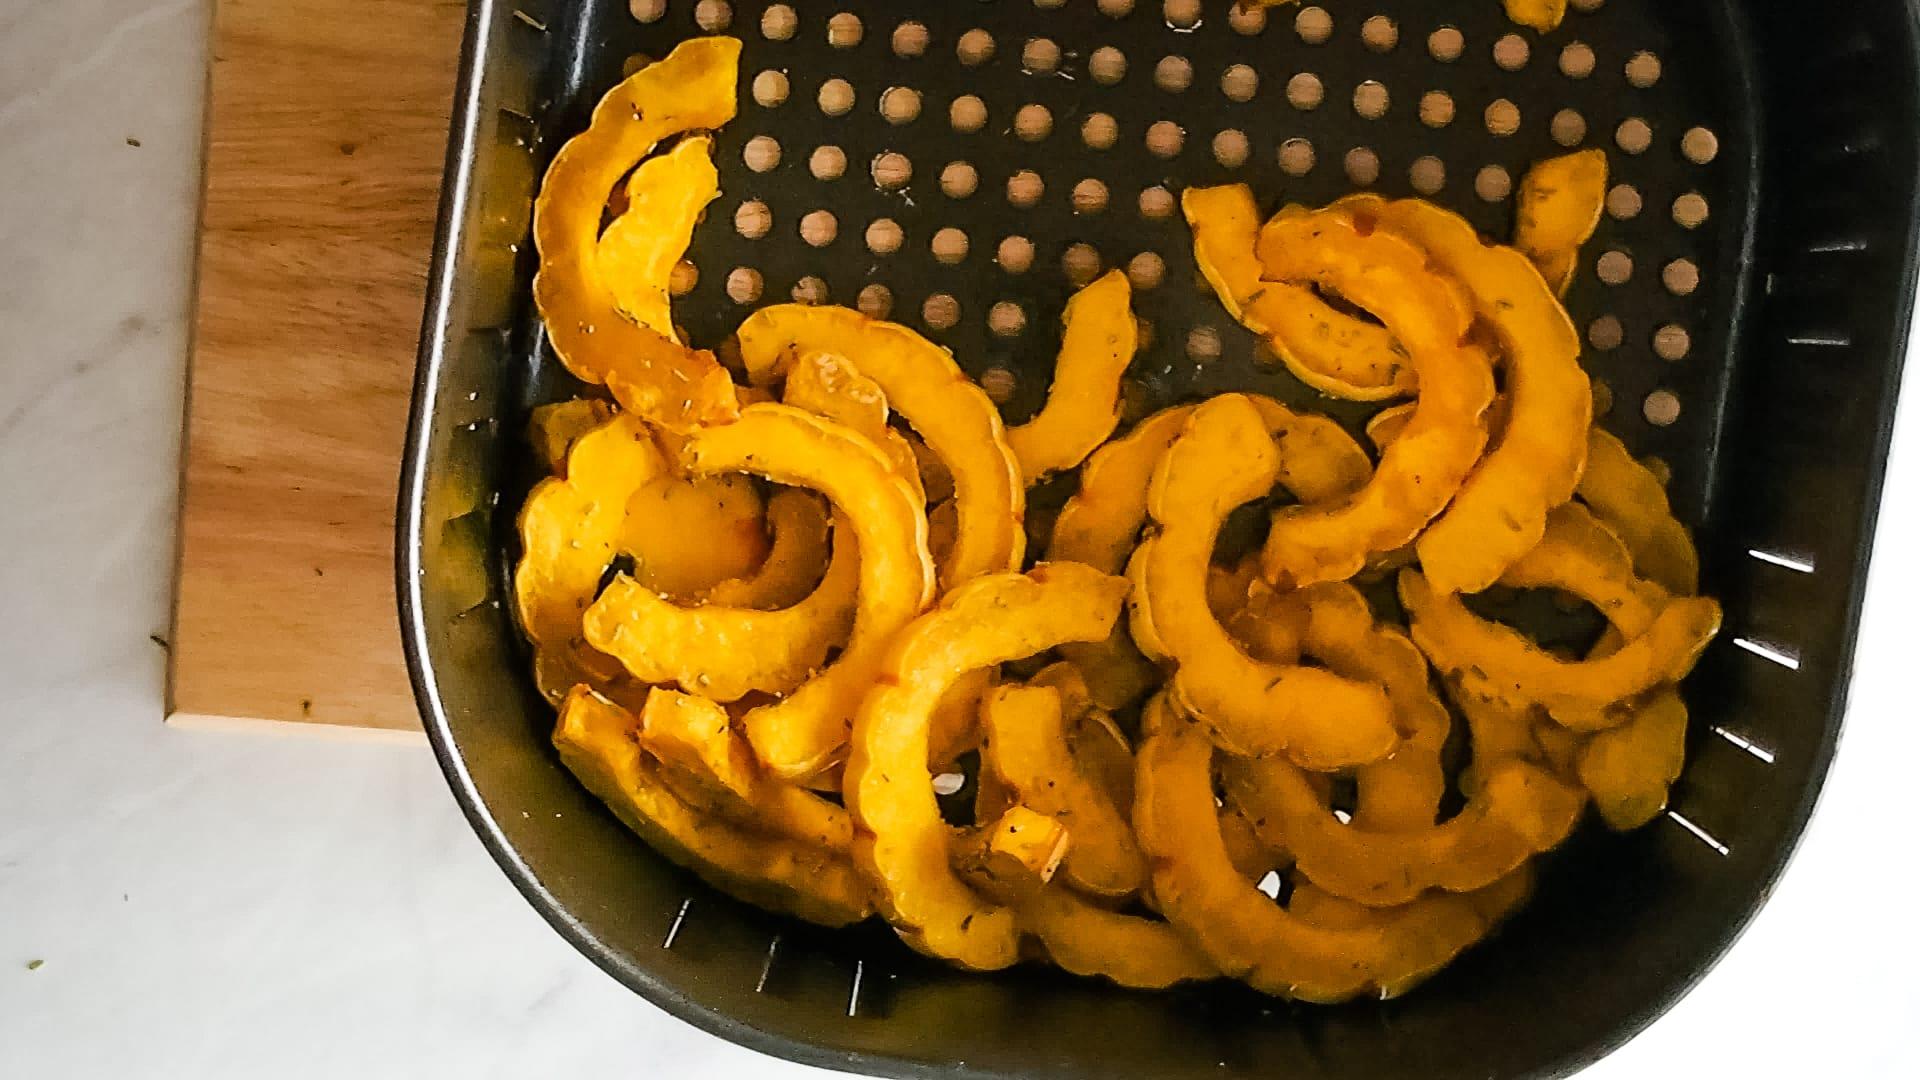 Air fryer delicata squash is a quick and easy side dish, perfectly seasonal for autumn. With the air fryer you can have roasted delicata squash on the table in about 15 minutes. There is no peeling necessary! These tasty crescent moon shaped squash rings make a fun finger food too, that you can eat as a healthy alternative to fries. #wintersquash #airfryer #delicata